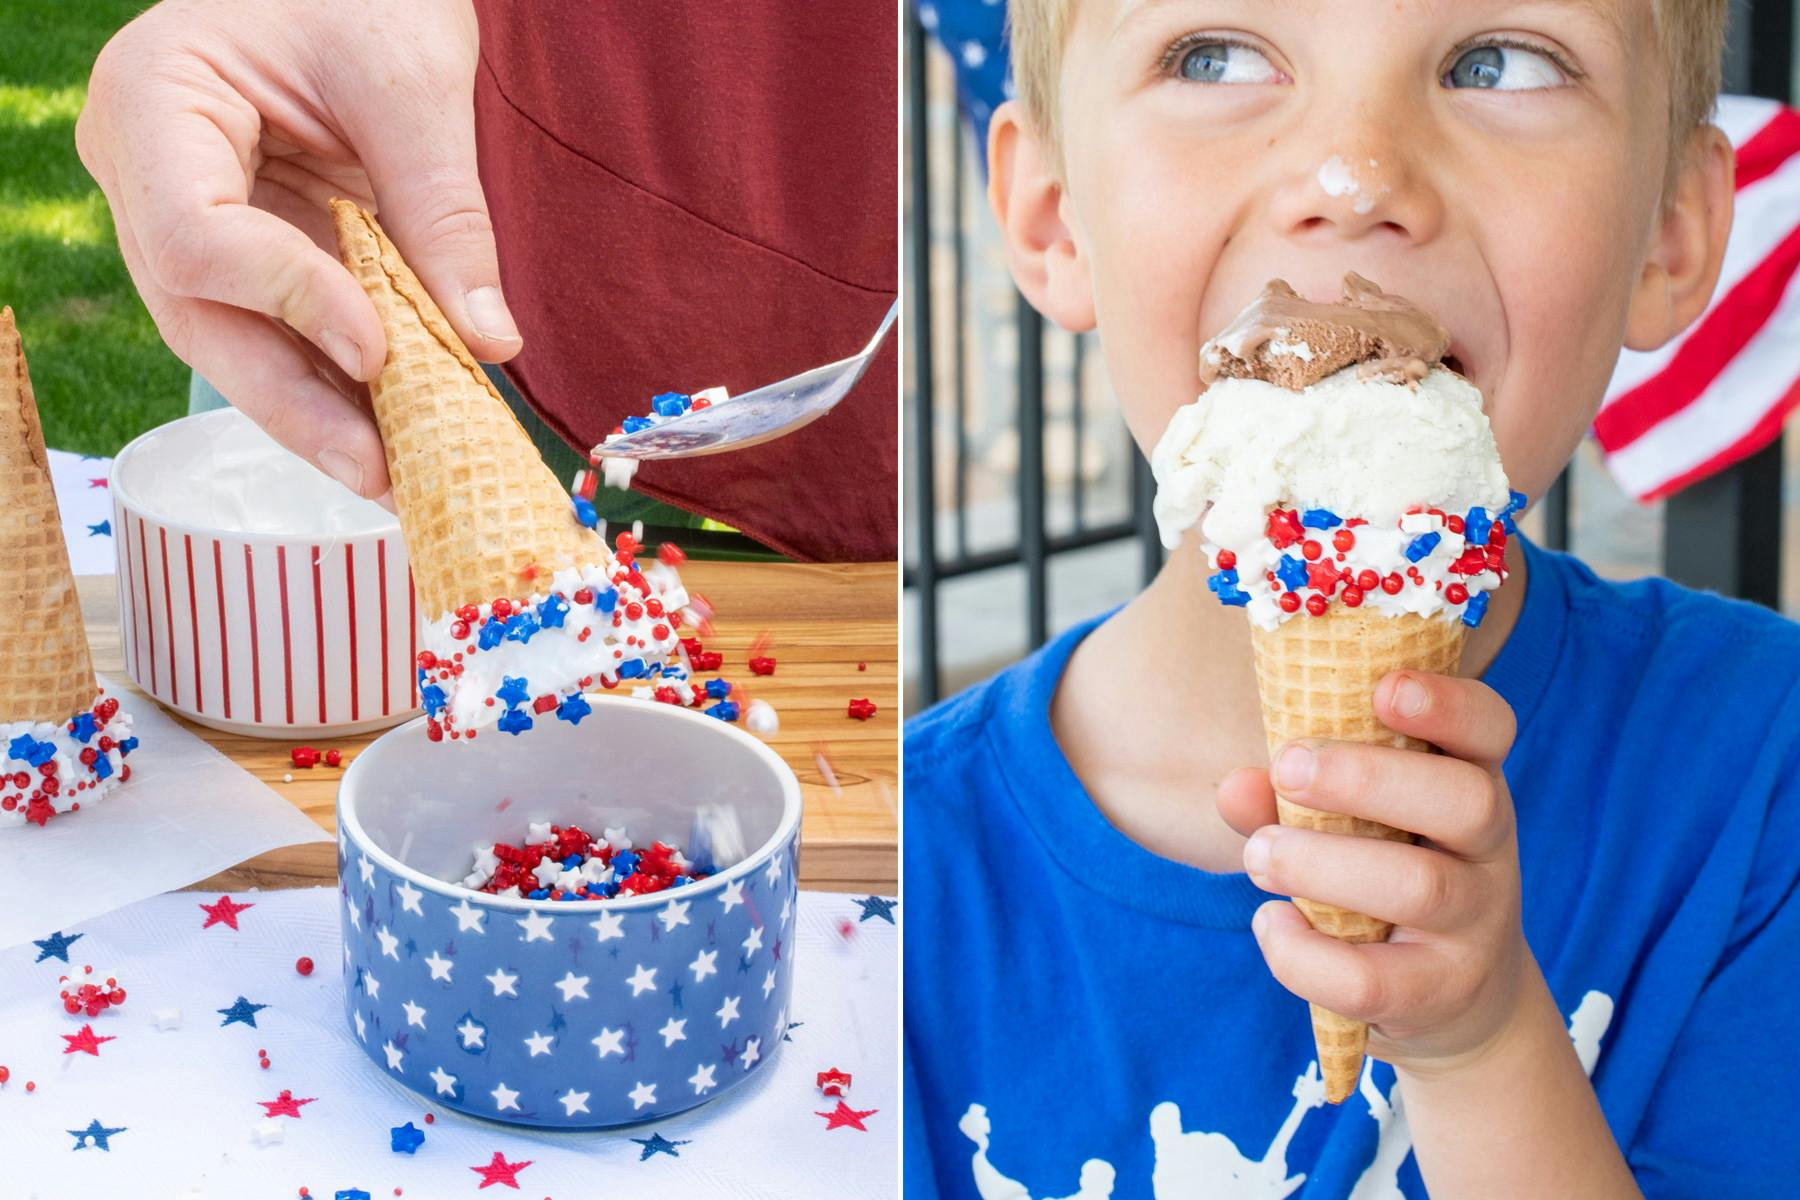 A person's hand dipping a white chocolate coated waffle cone into some red, white, and blue sprinkles, and a child enjoying ice cream out of one of the chocolate-and-sprinkle-dipped cones.